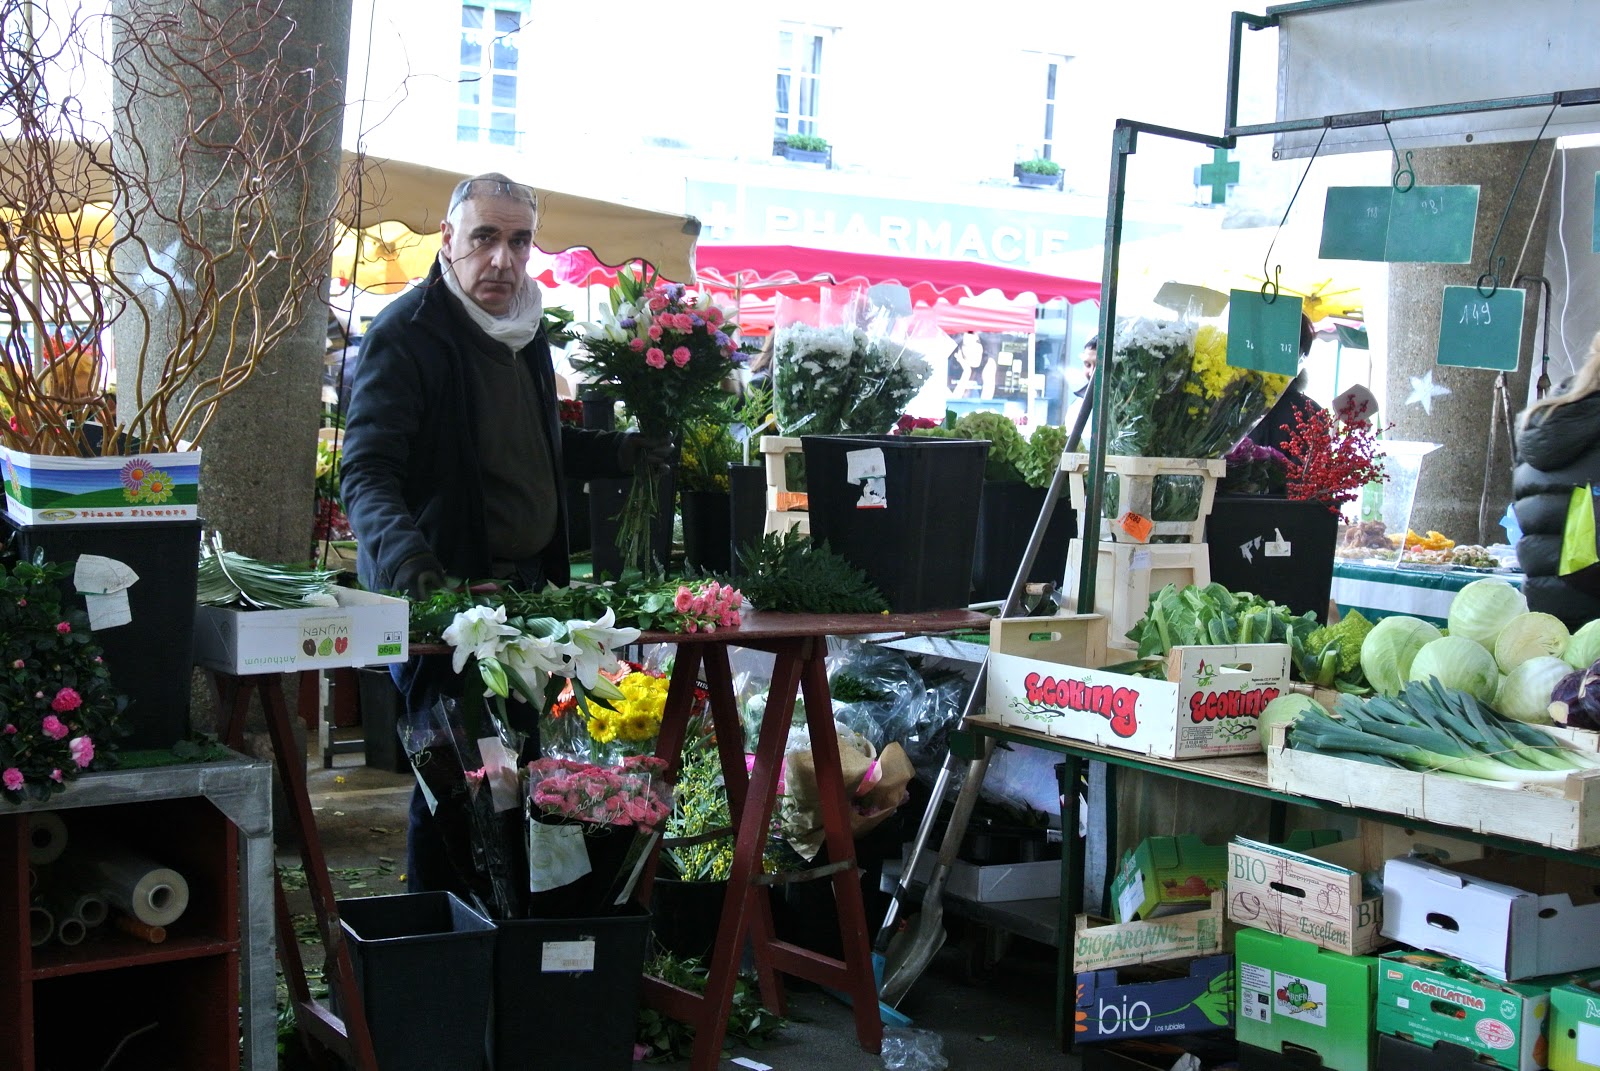 danielle abroad: how to visit a french market